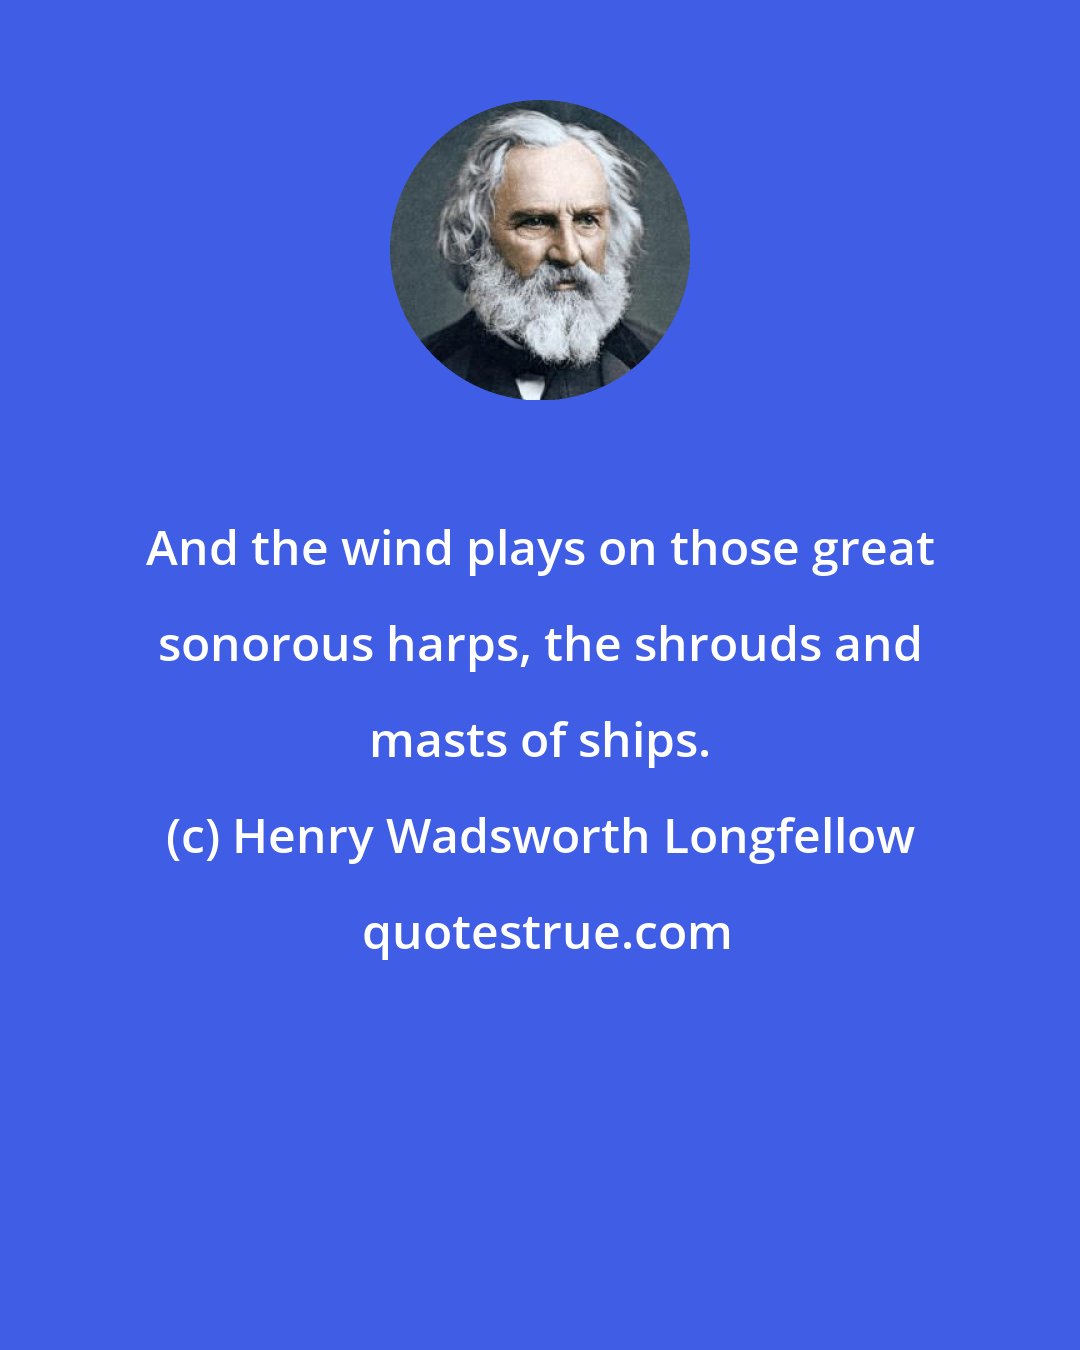 Henry Wadsworth Longfellow: And the wind plays on those great sonorous harps, the shrouds and masts of ships.